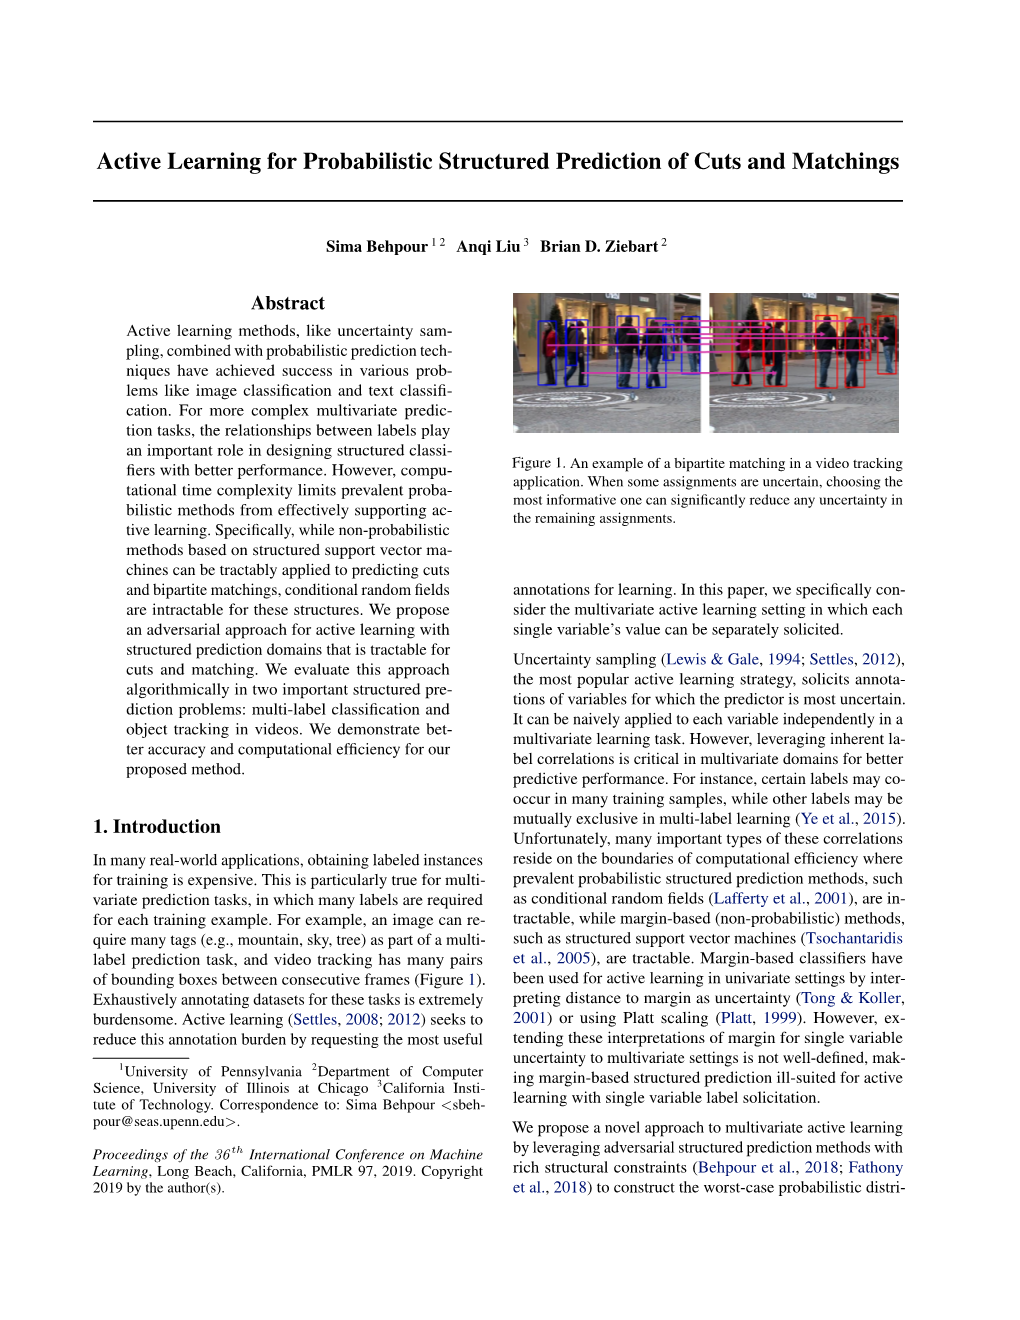 Active Learning for Probabilistic Structured Prediction of Cuts and Matchings